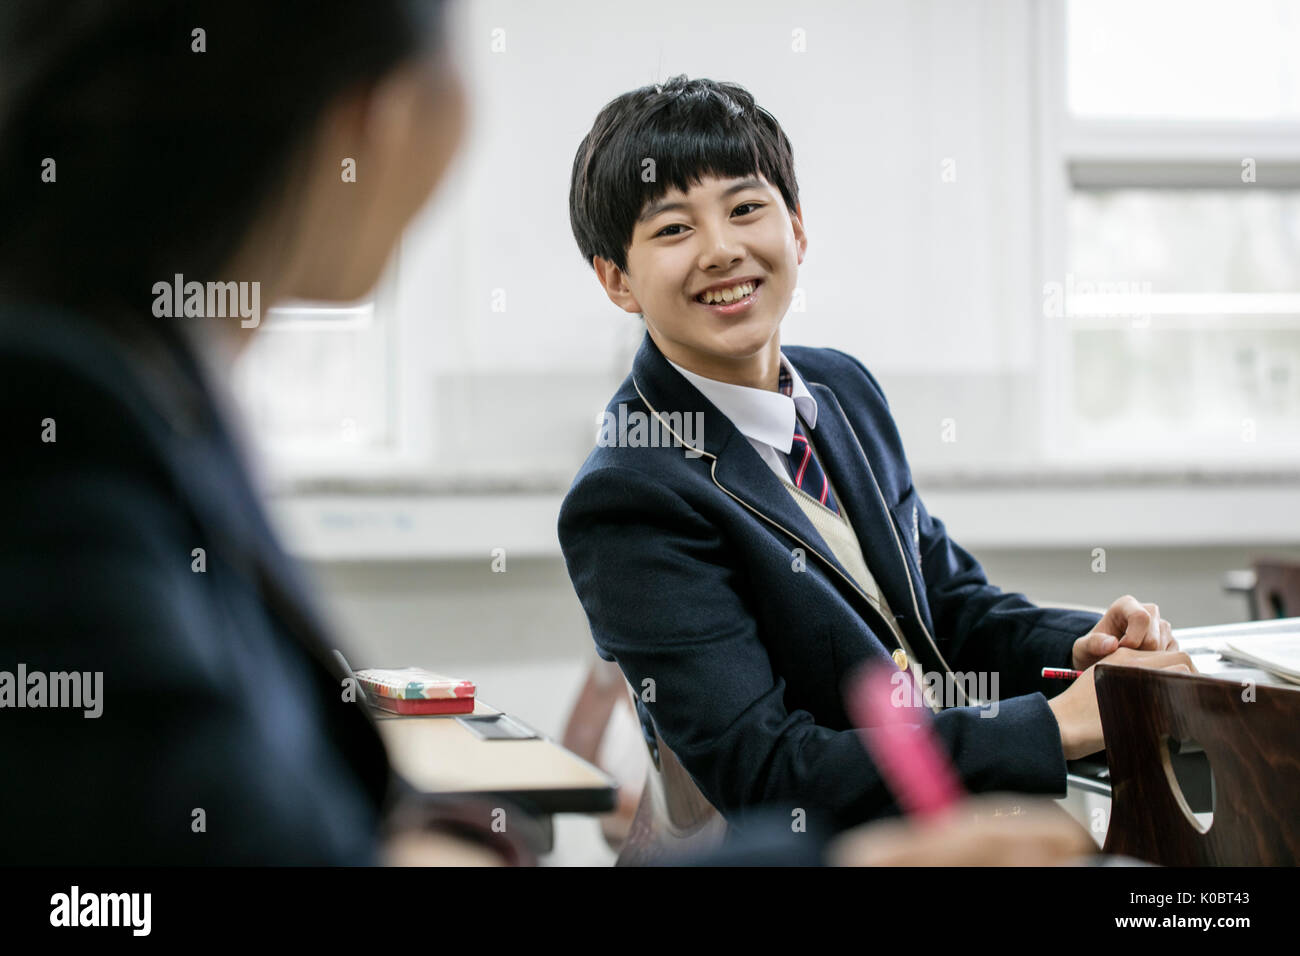 Portrait of school boy smiling at his friend in classroom Stock Photo